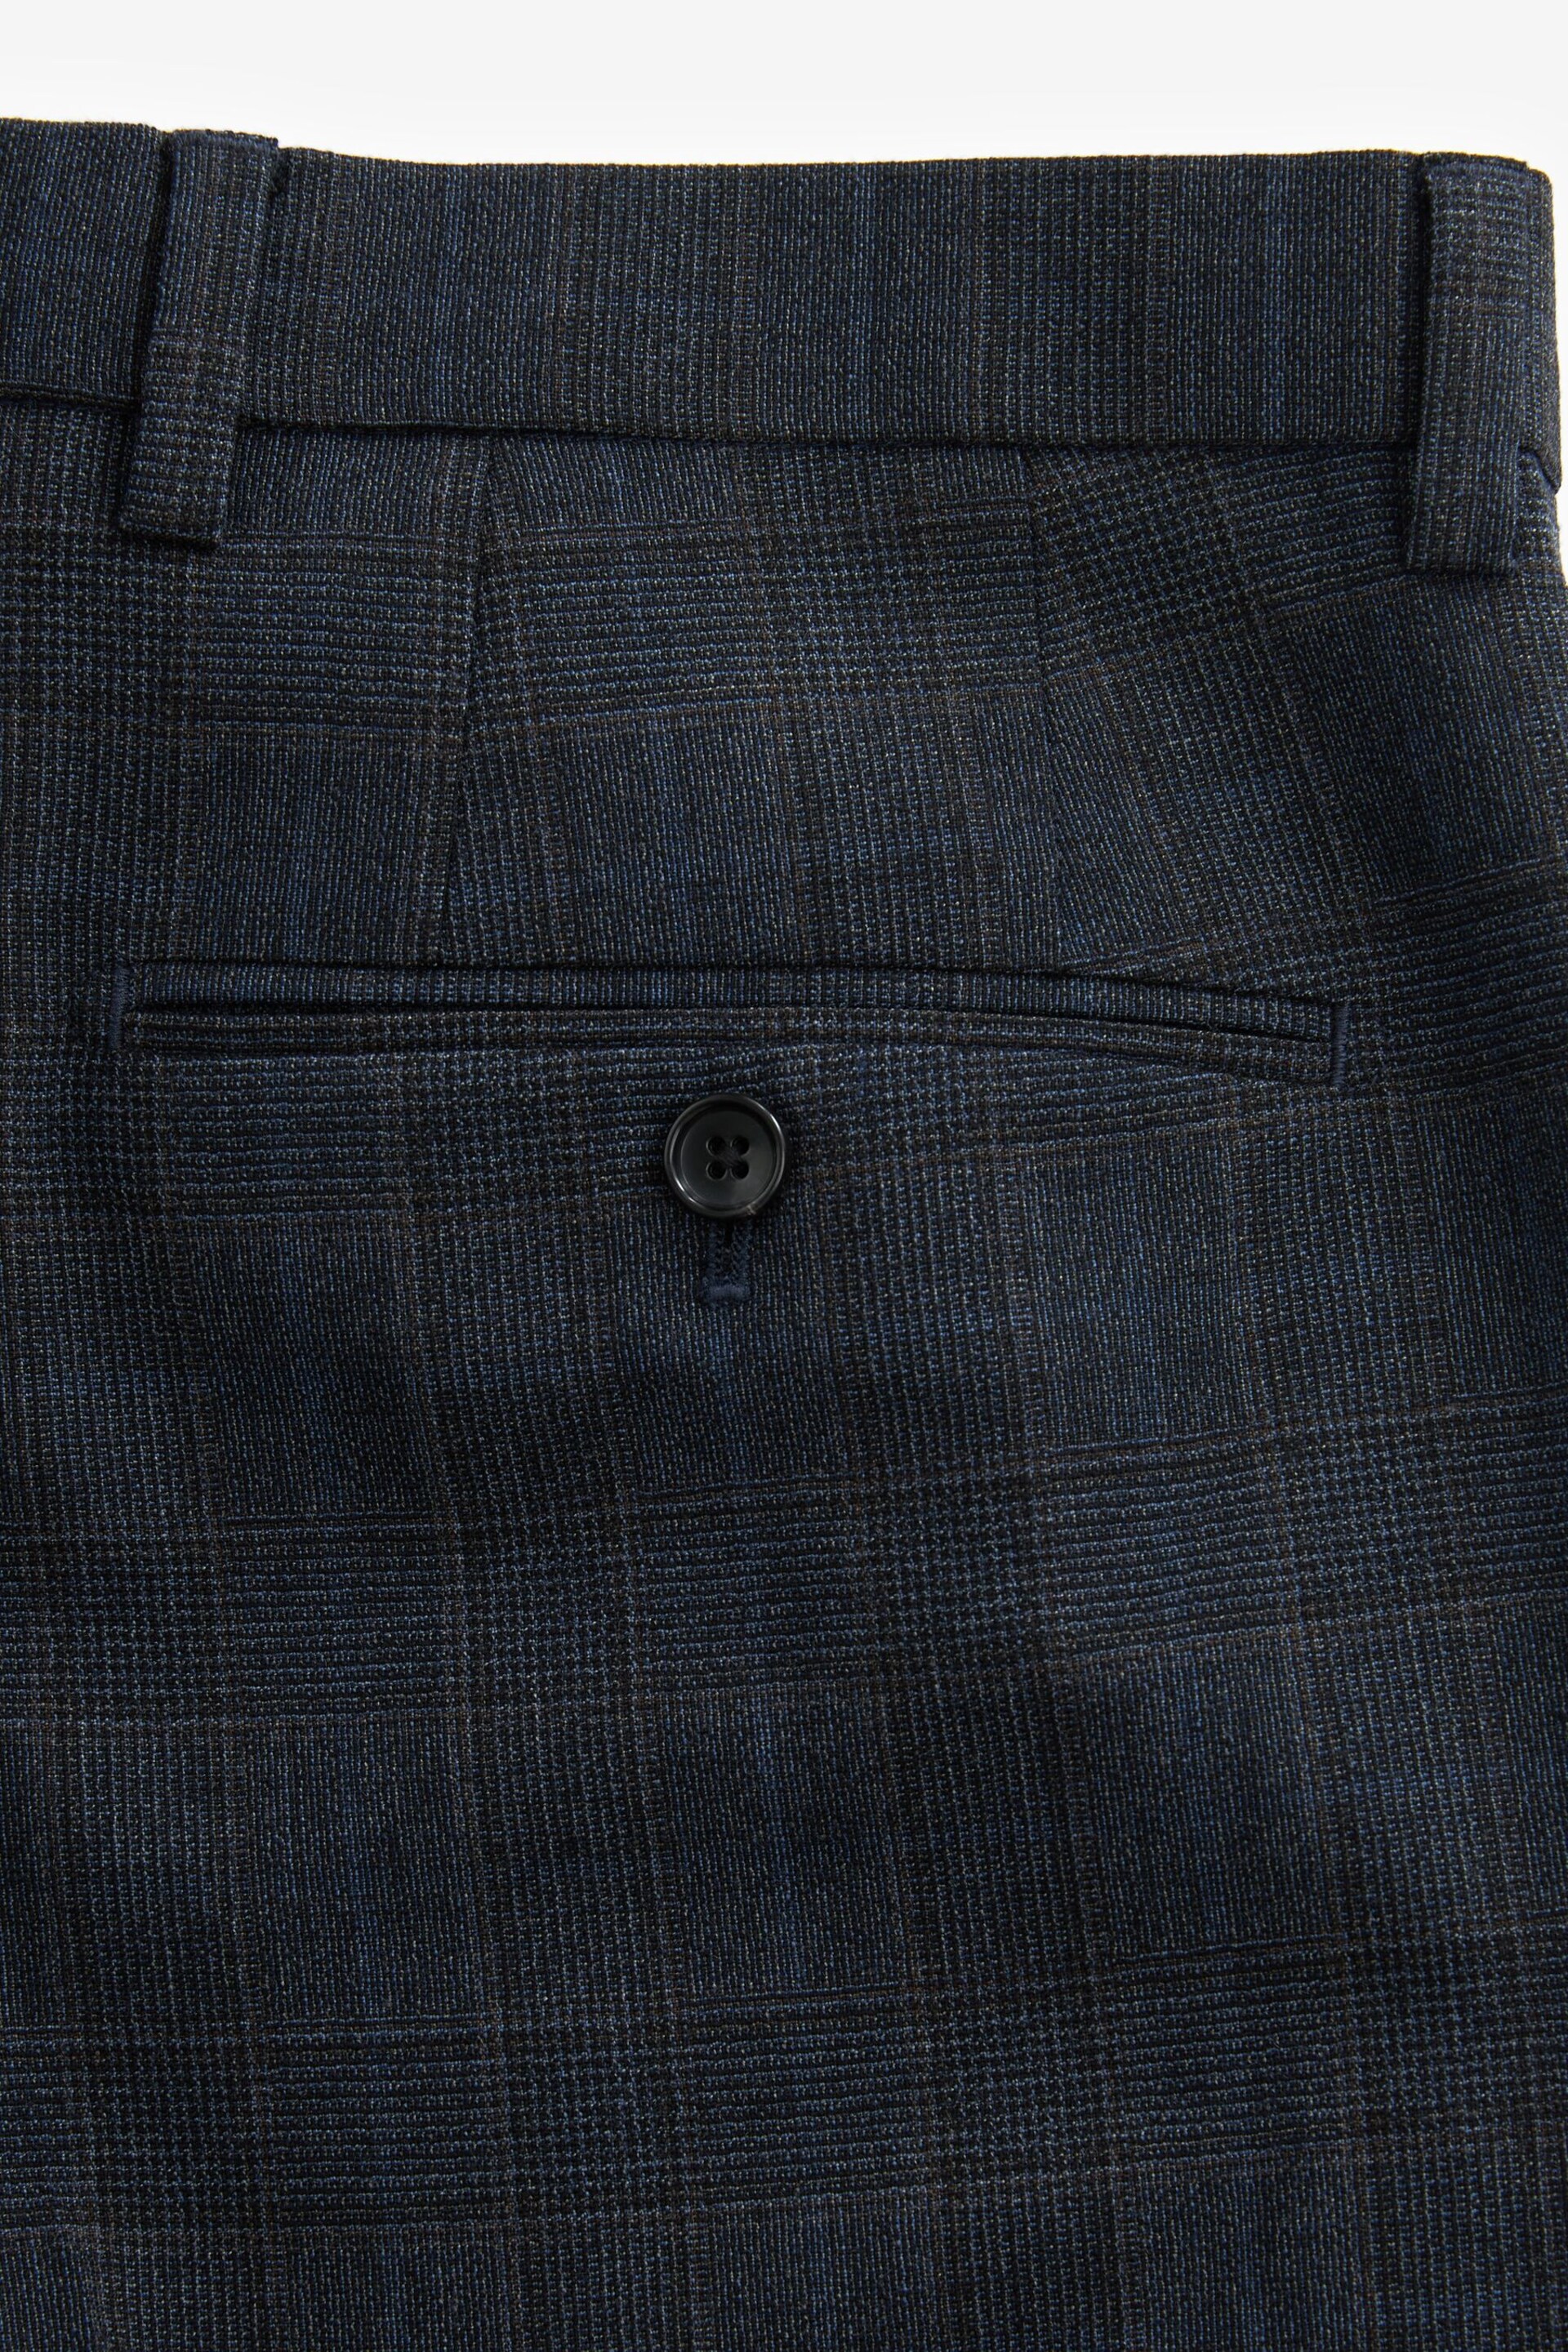 Blue Regular Fit Check Signature Suit: Trousers - Image 9 of 11